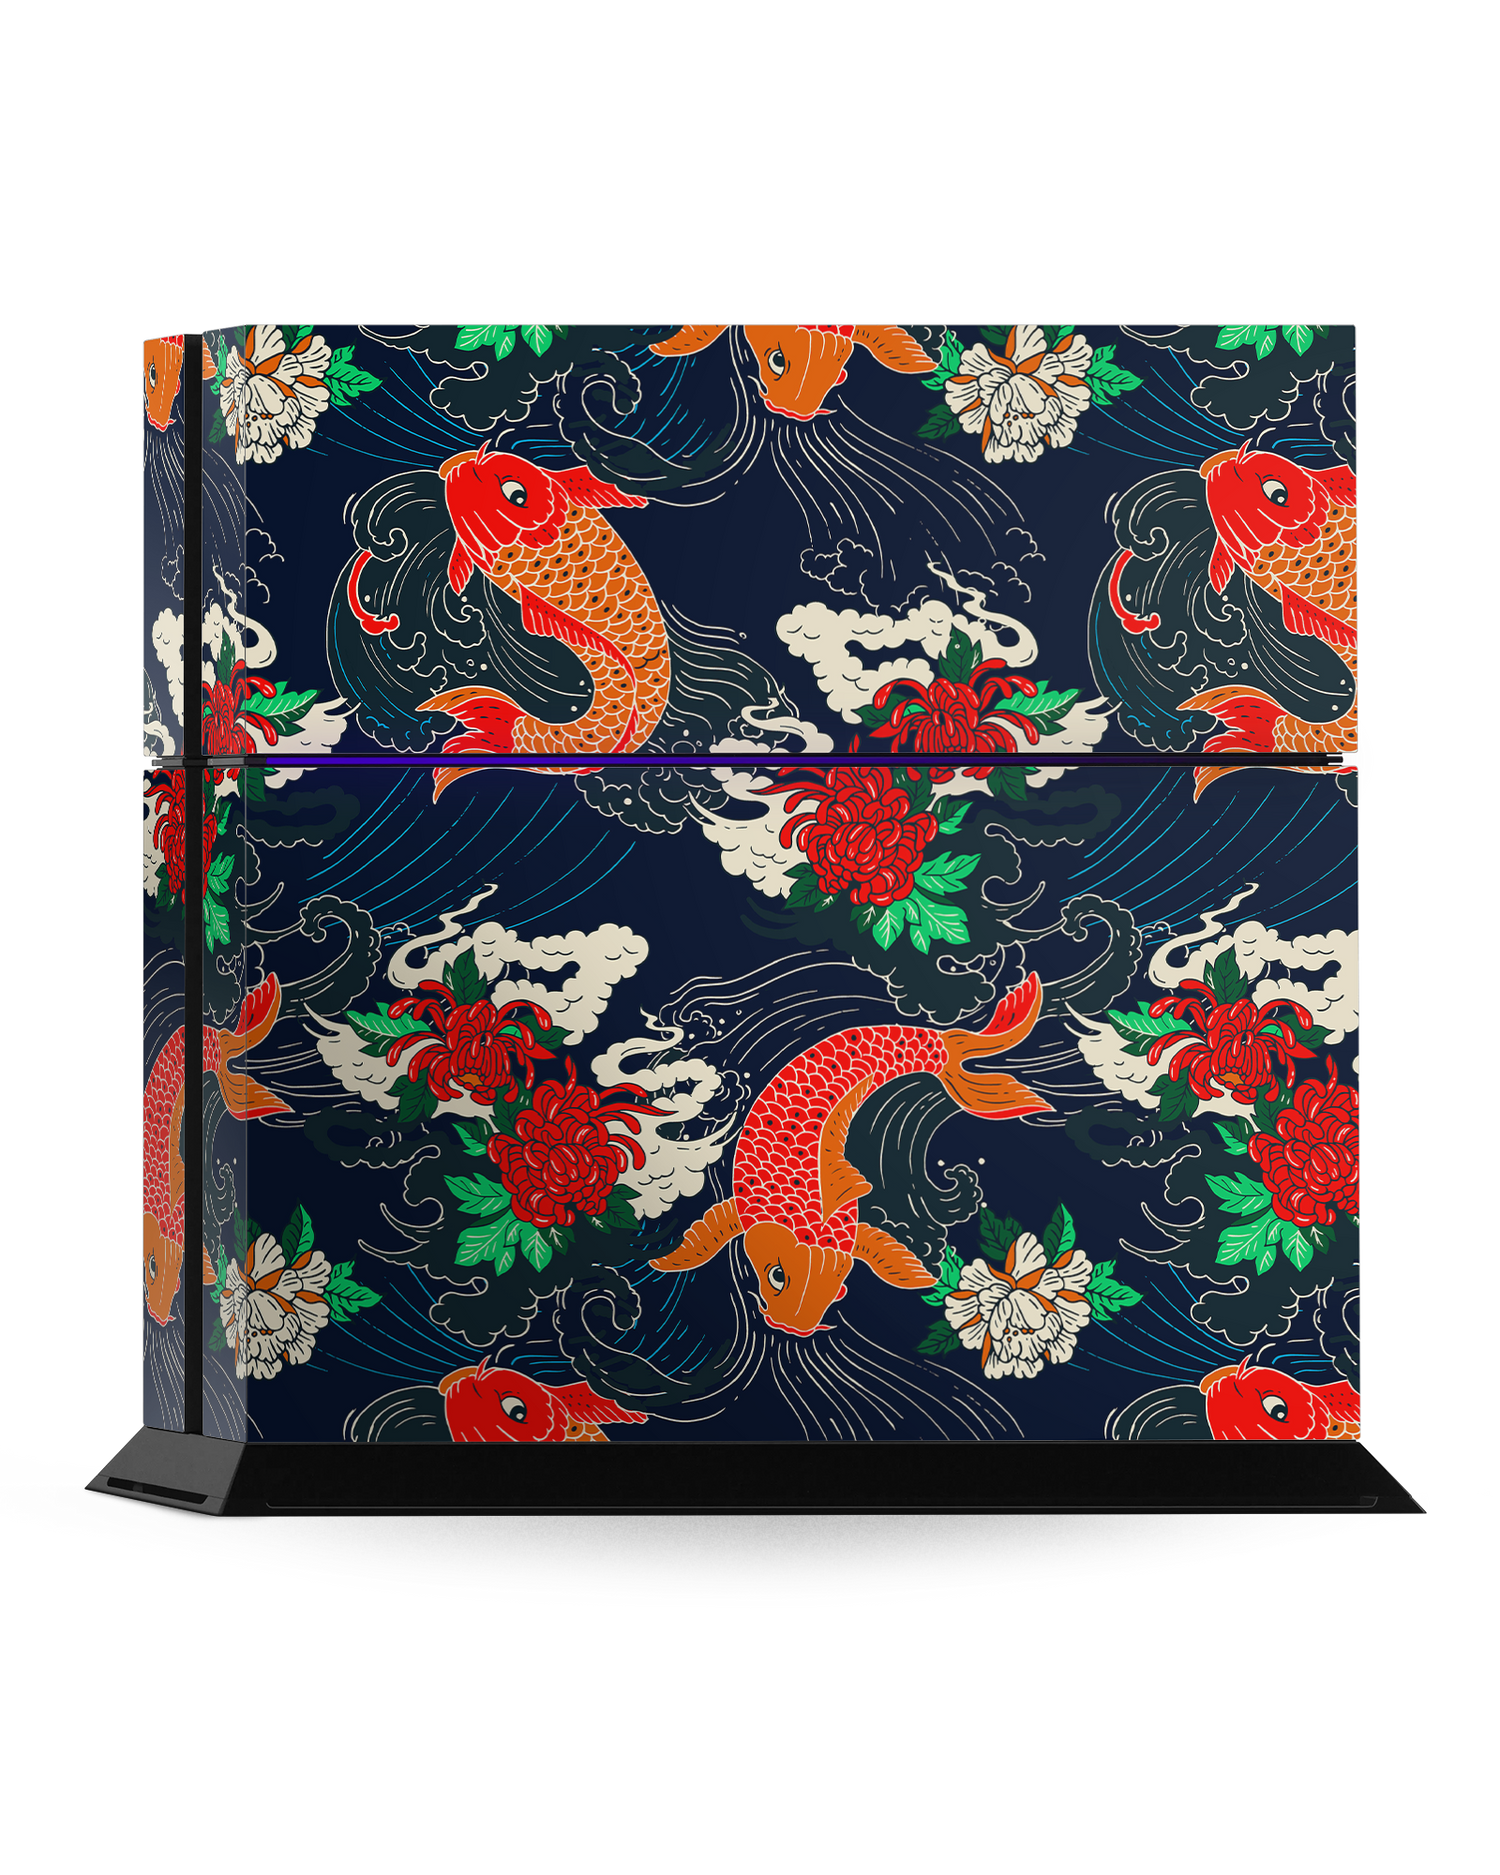 Repeating Koi Console Skin for Sony PlayStation 4: Standing